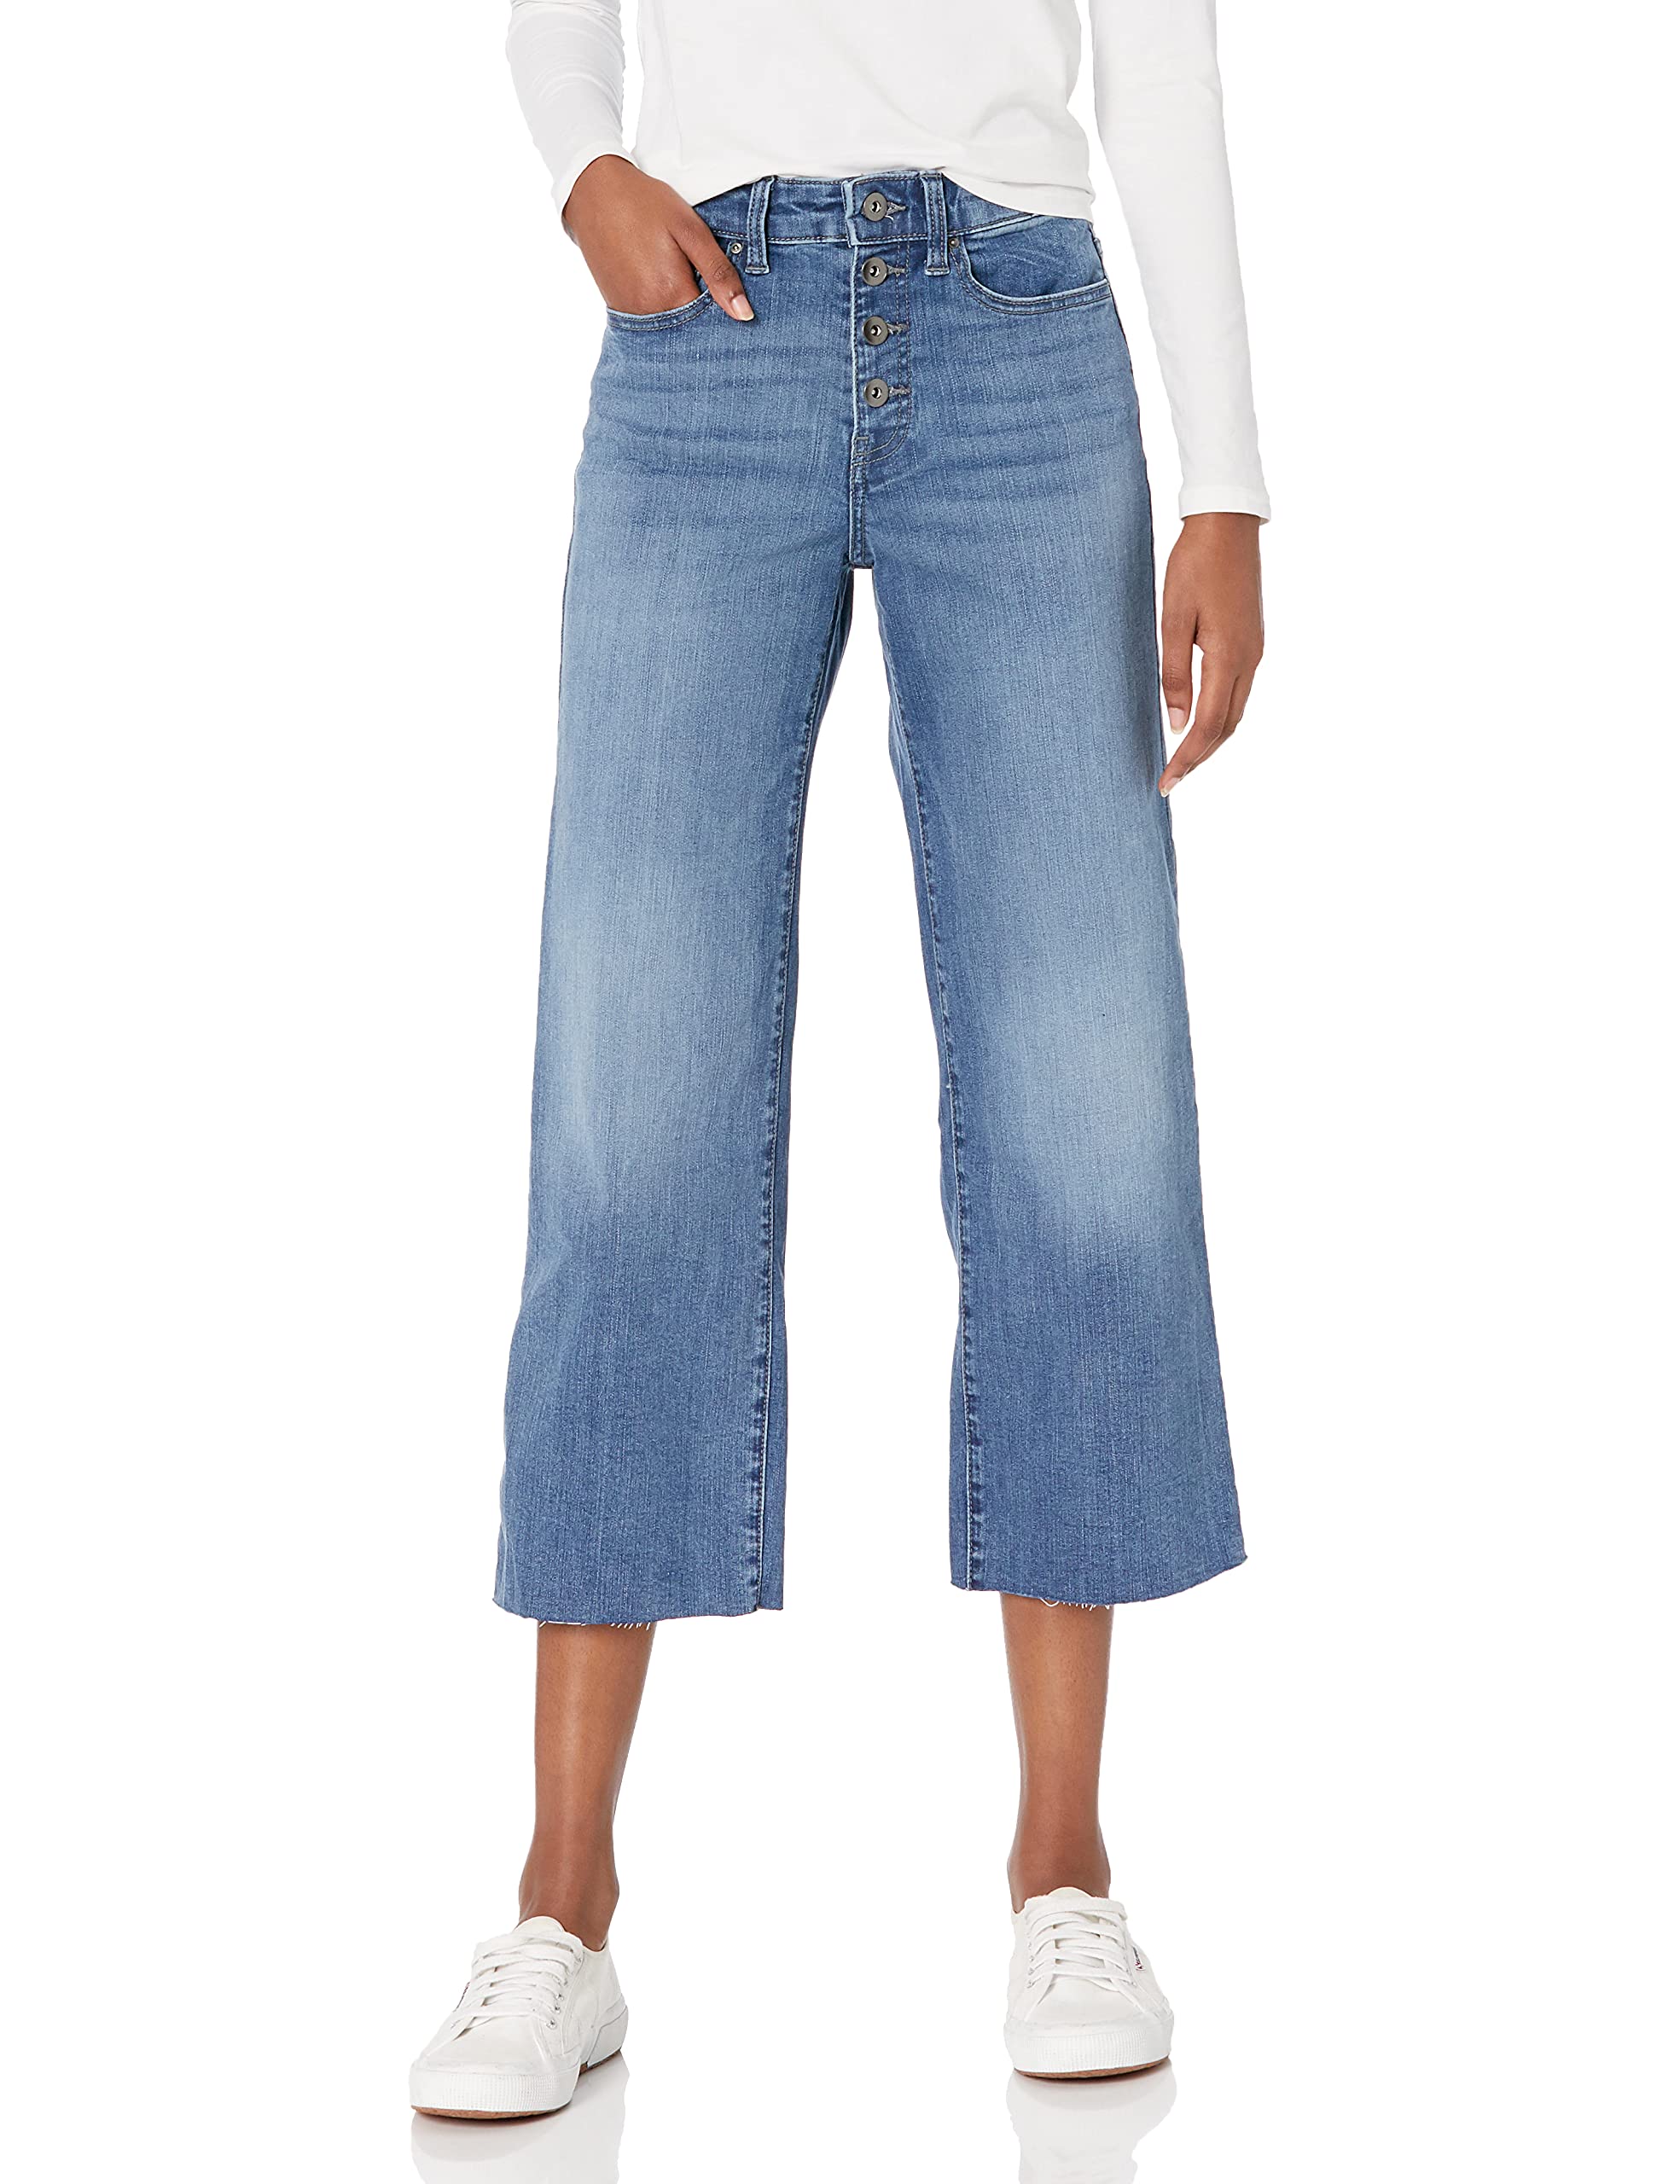 Book Cover Daily Ritual Women's Standard Denim Coulotte Pant-Both Bases